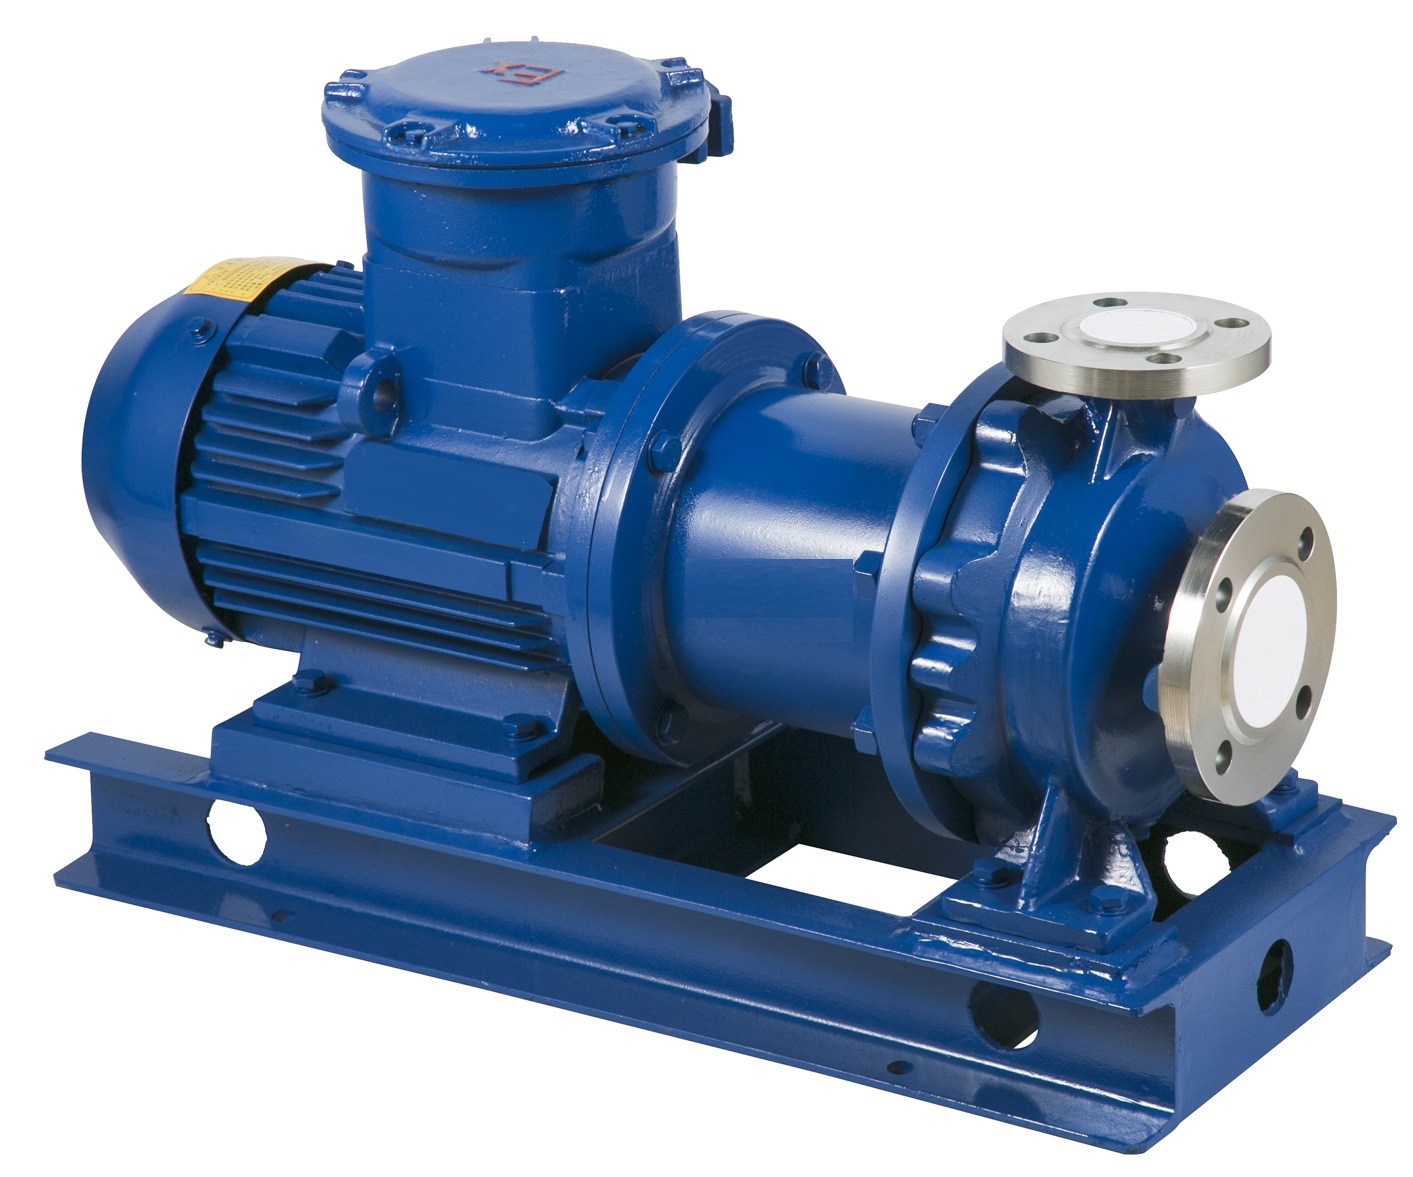 CLOSED COUPLED MAGNETIC PUMP